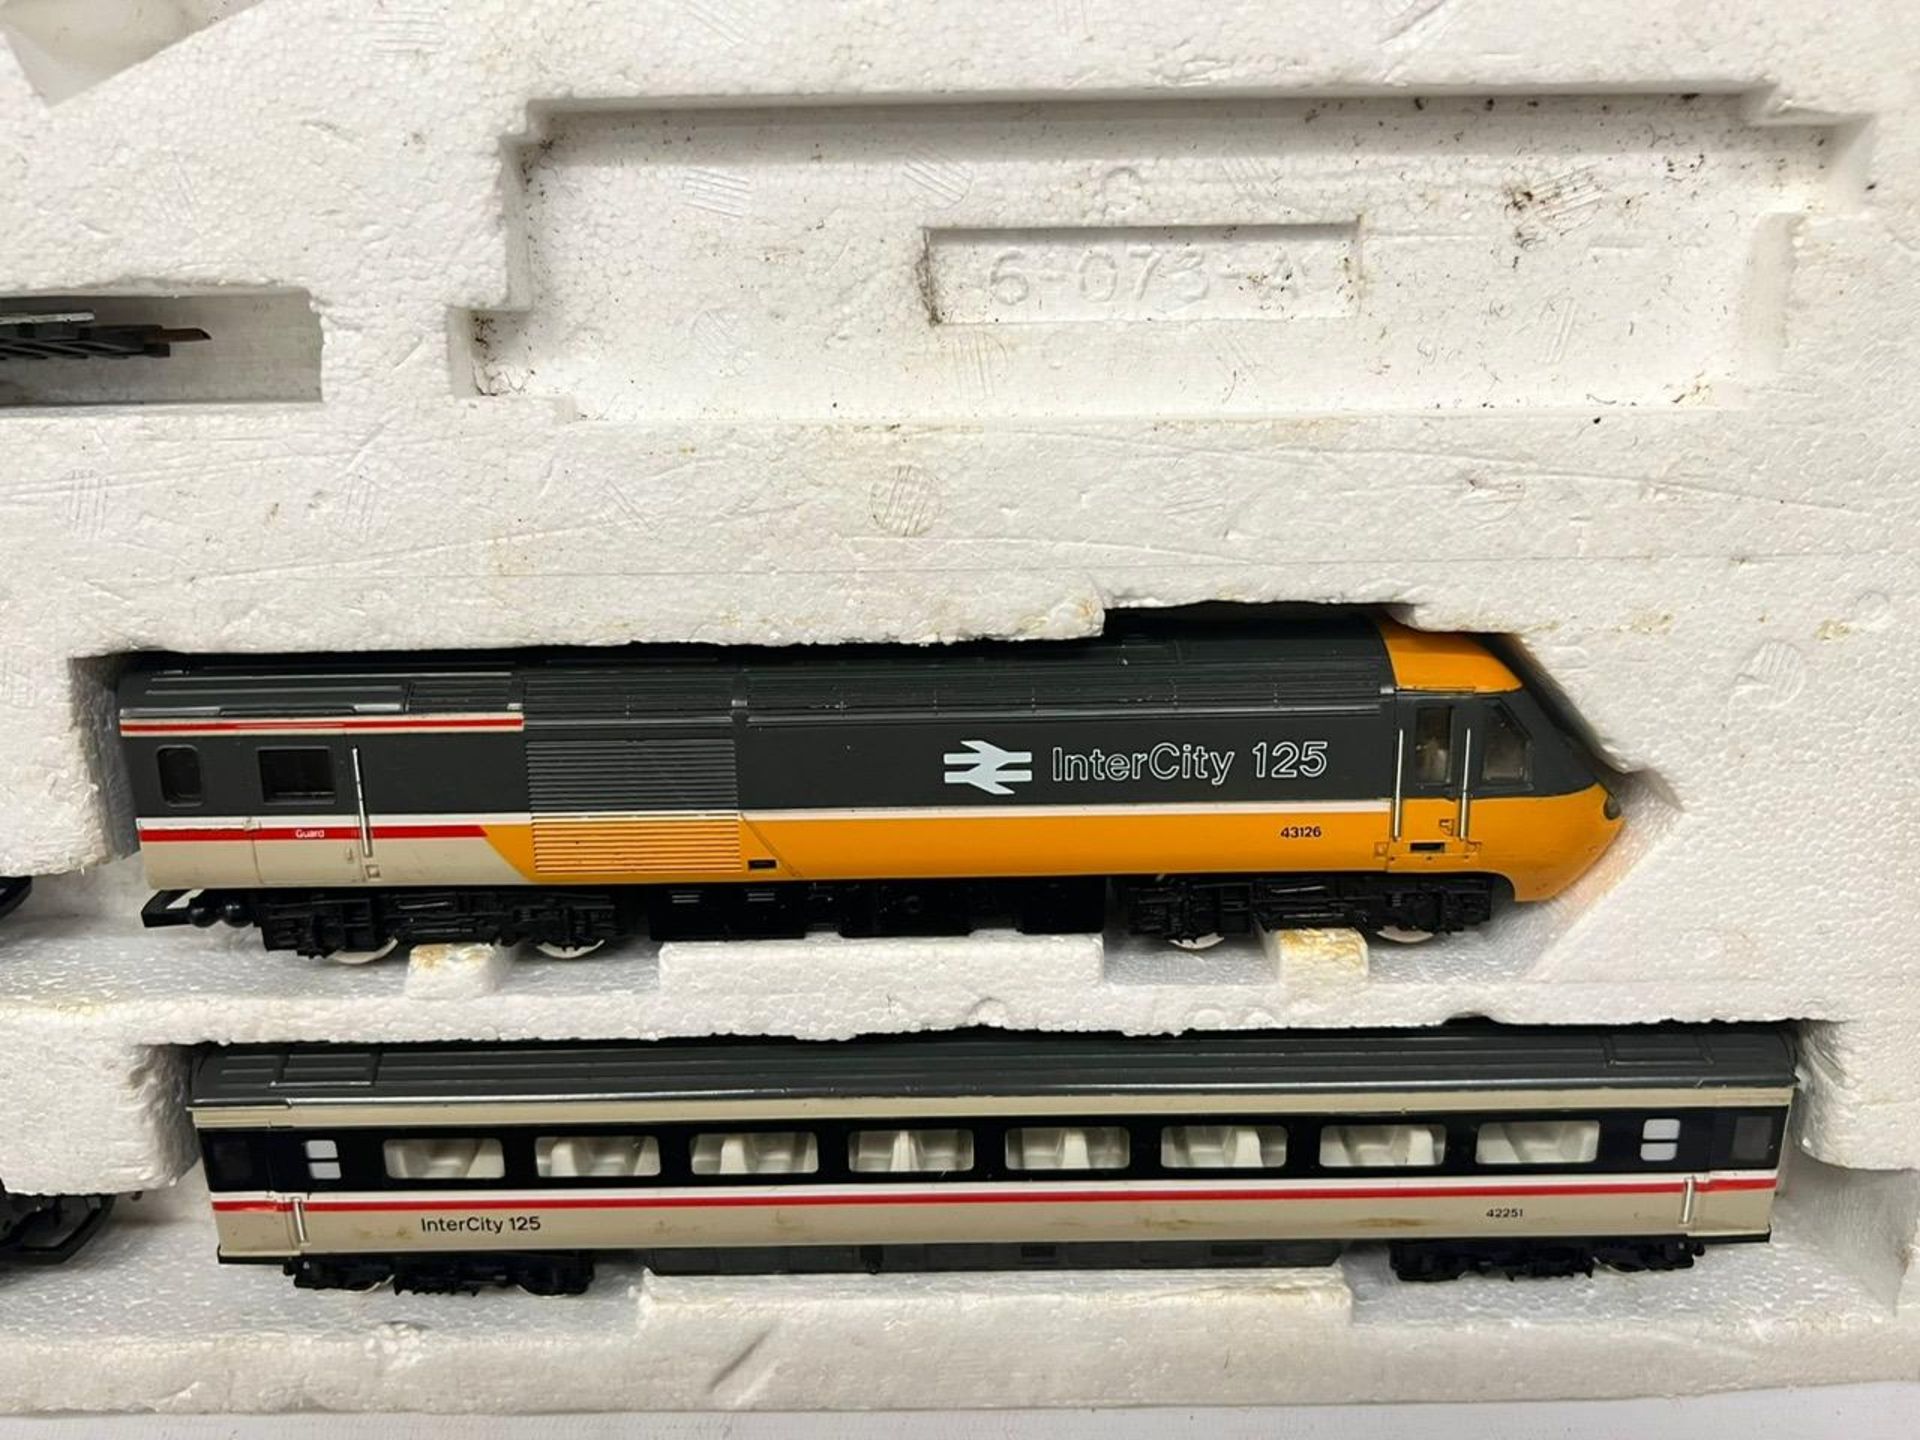 A HORNBY BOXED OO GAUGE HIGH SPEED TRAIN SET COMPRISING DOUBLE 125 LOCO, TWO PASSENGER CARRIAGES AND - Image 4 of 4